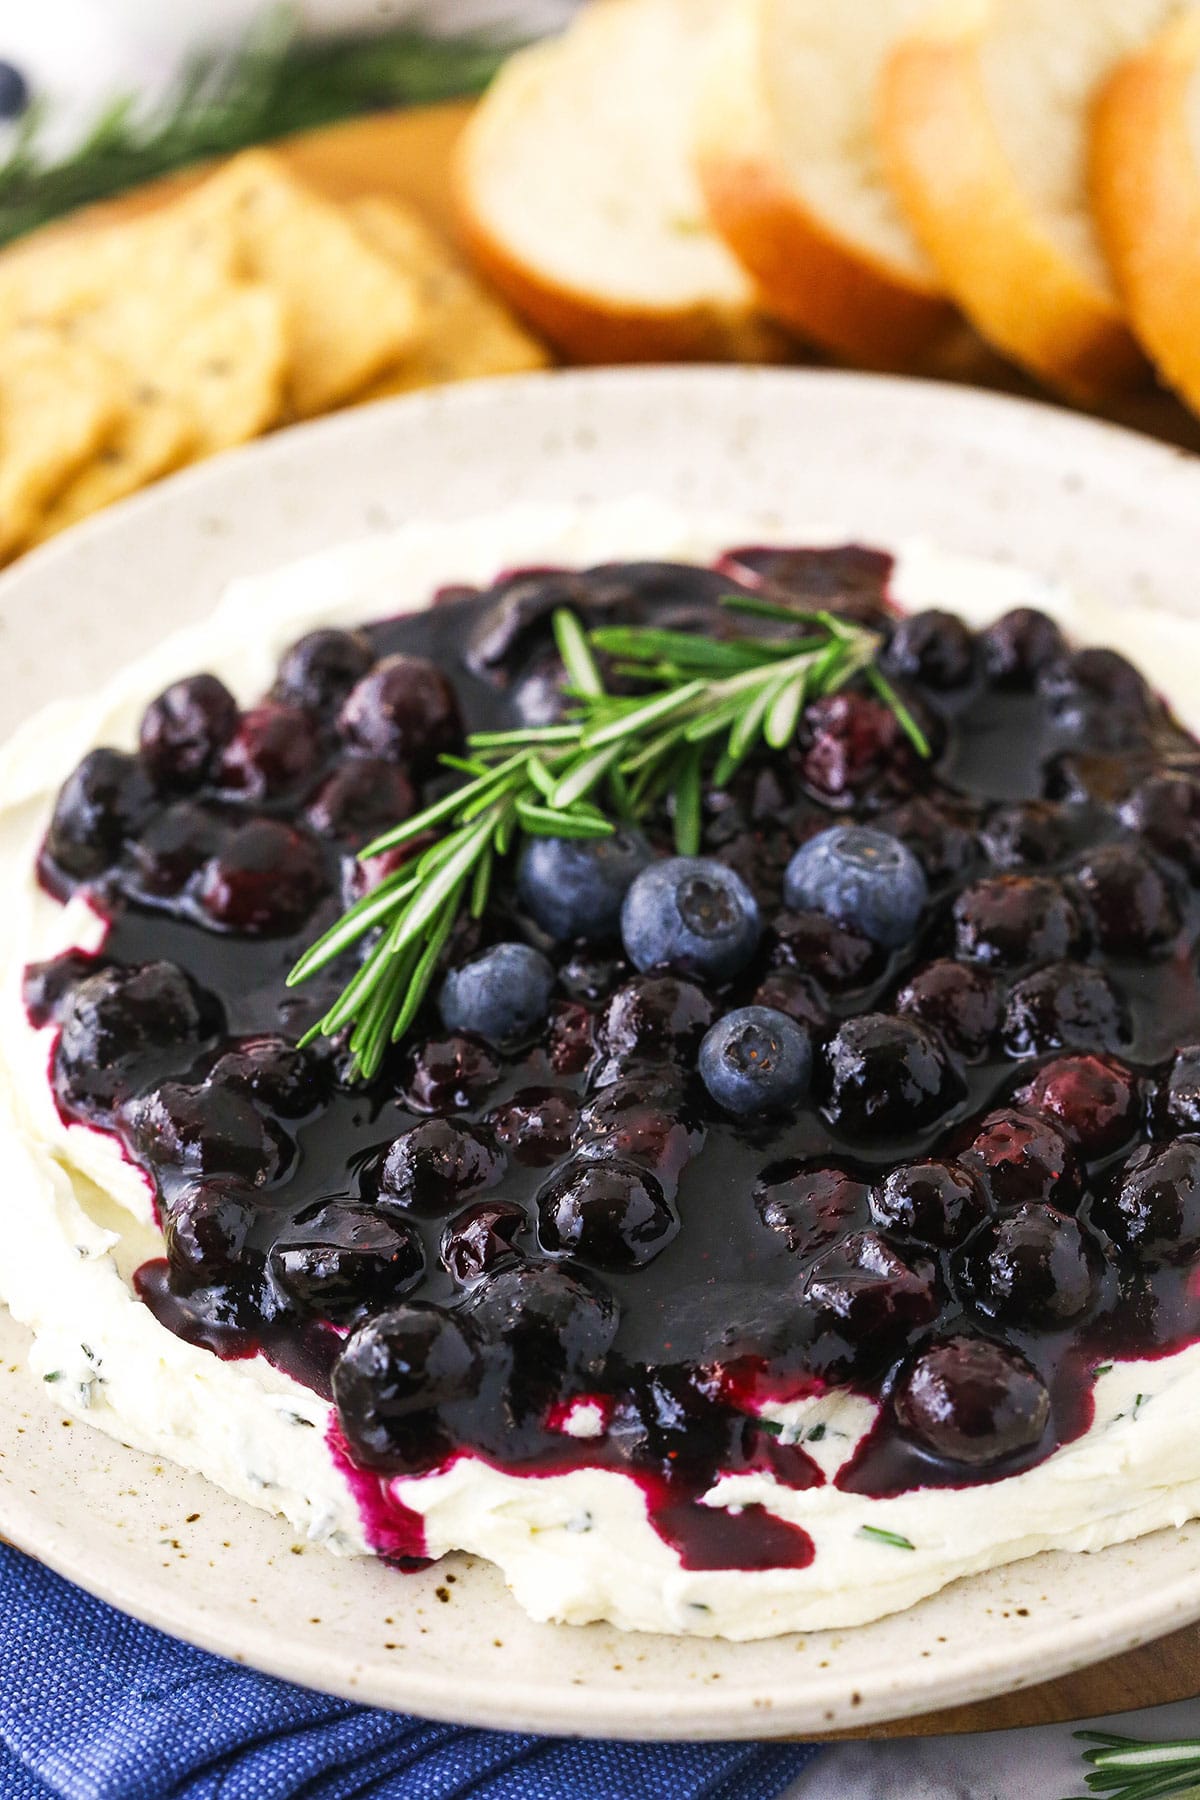 Rosemary berry cheese dip on a plate with a spotted kitchen towel underneath it